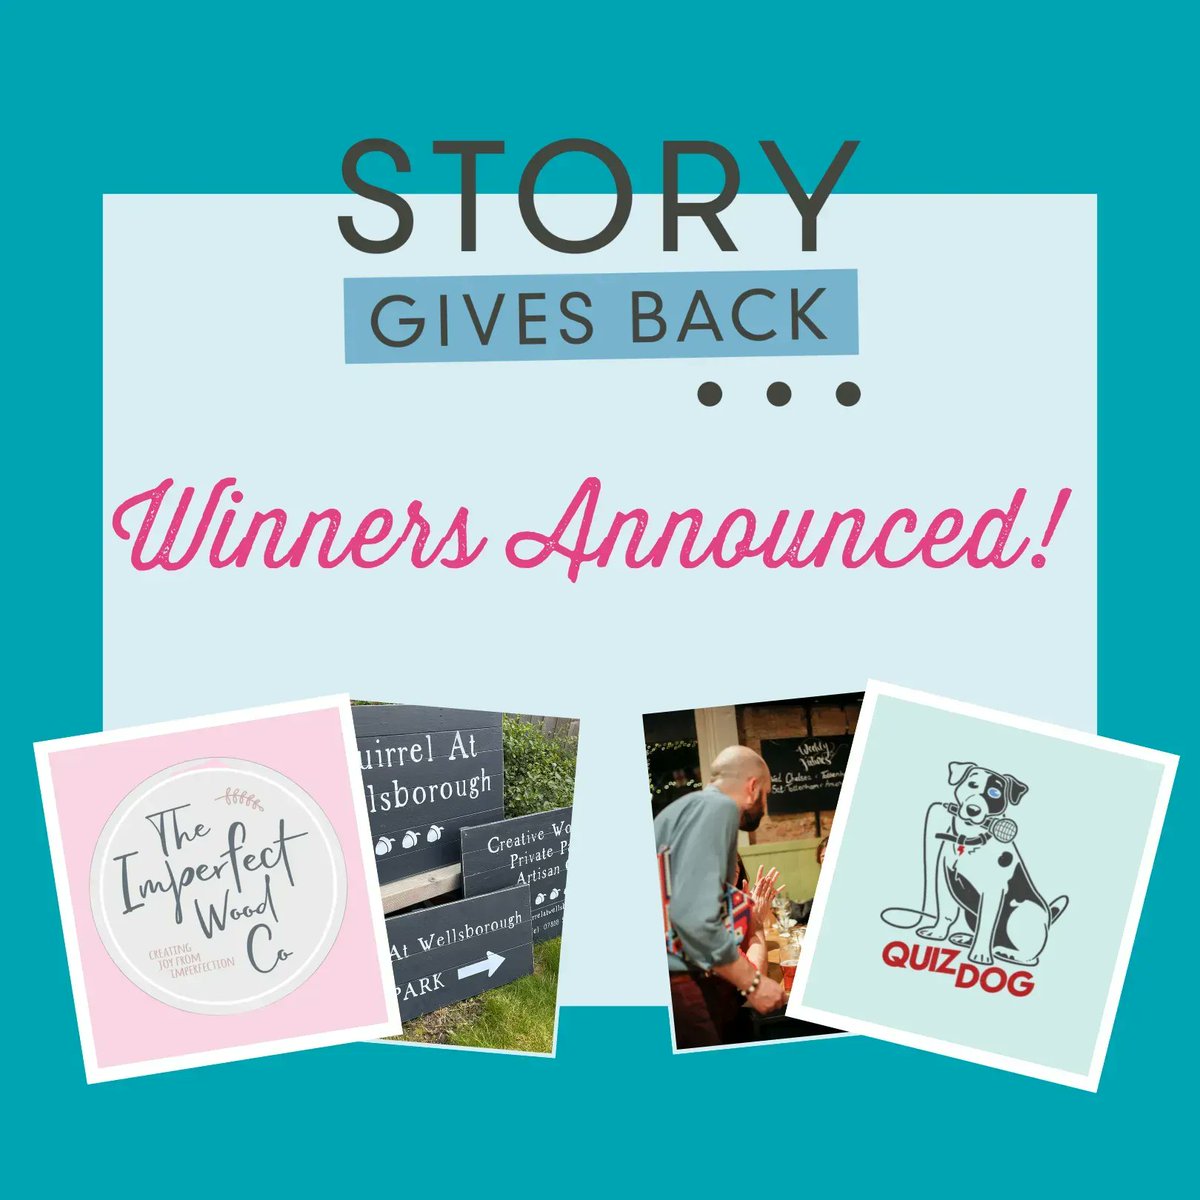 The votes are in for our #StoryGivesBack initiative! We are delighted to announce that the winners of a free stand at our upcoming Show are @theimperfectwoodcompany & @quizdog! Thank you for everyone who voted! Come meet the winners at the upcoming Show in February! #LSES